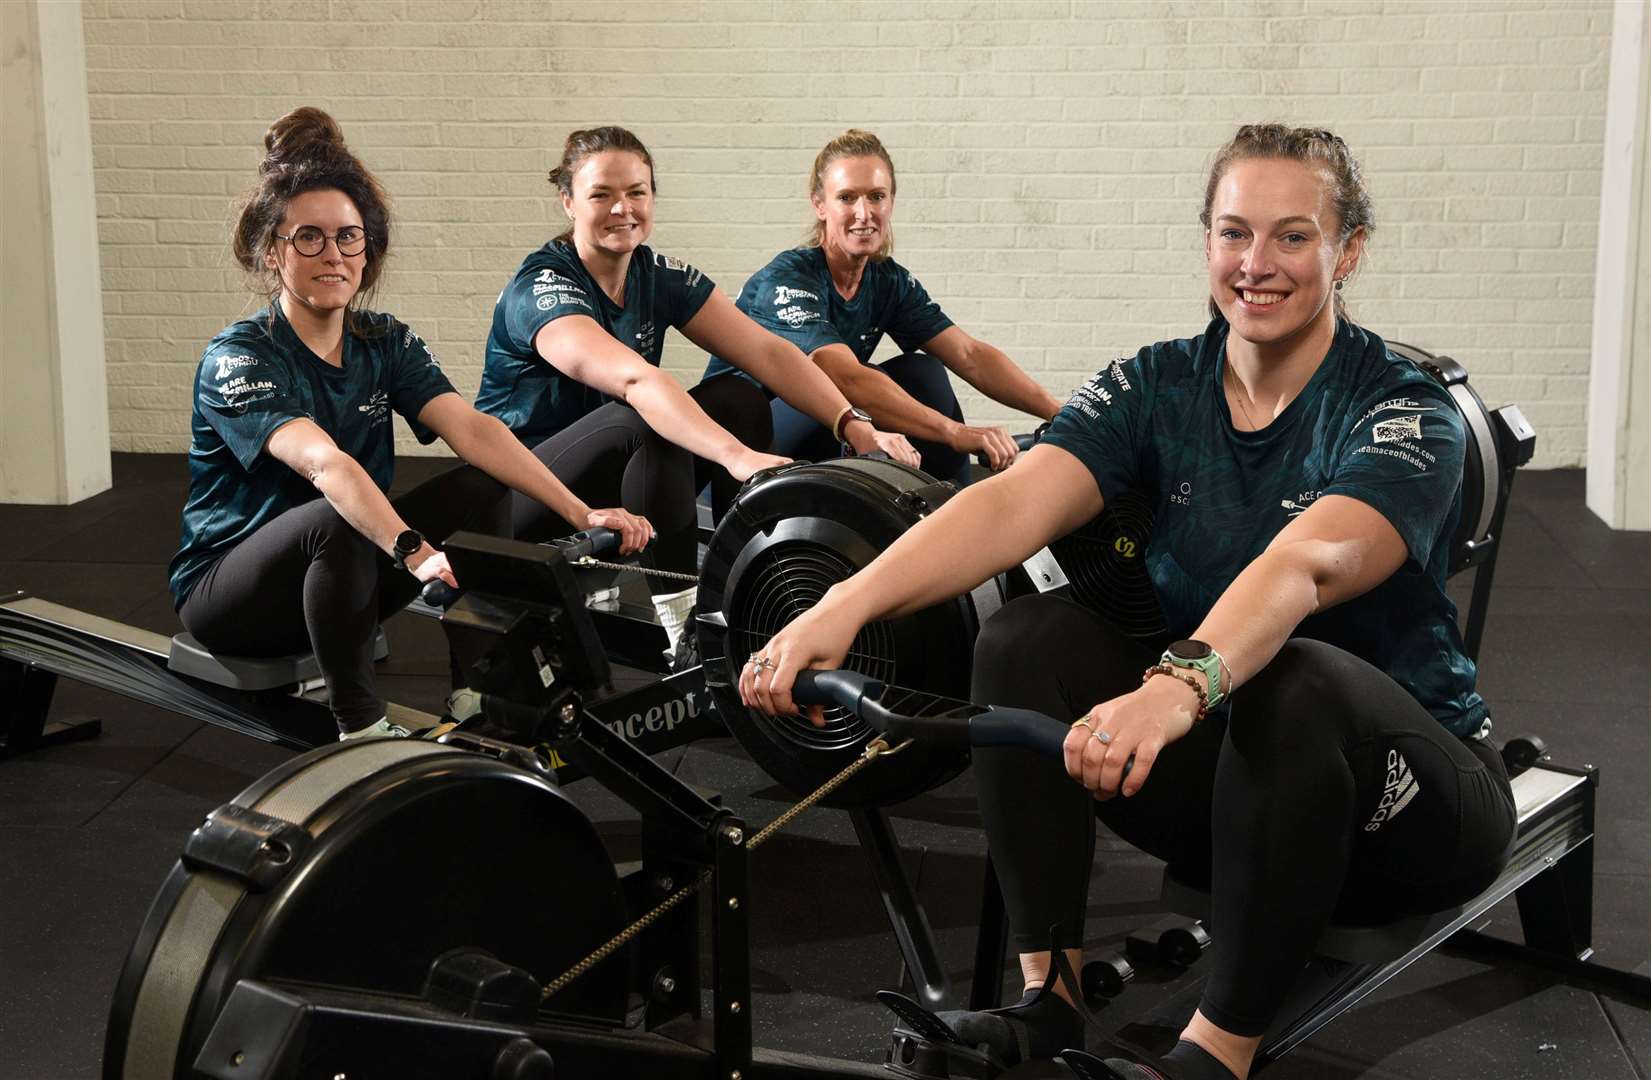 Sittingbourne rower Katherine Windsor, foreground, and her teammates Lizz Watson, Laura Langton and Beth MotleyPicture: Rob Lacey